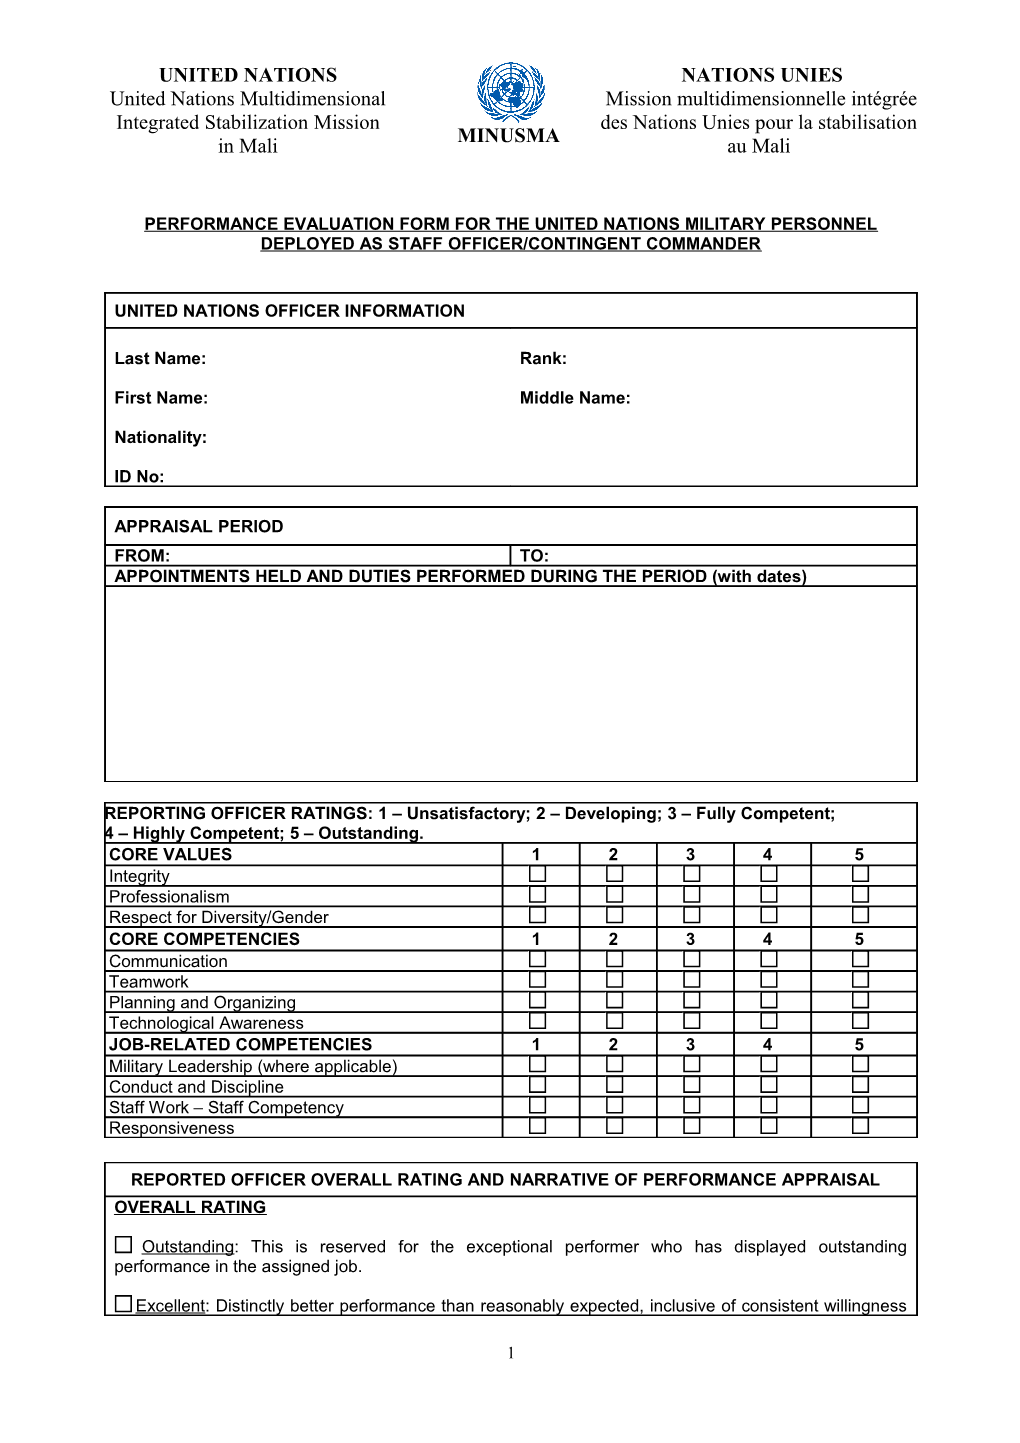 Performance Evaluation Form for the United Nations Military Personnel Deployed As Staff